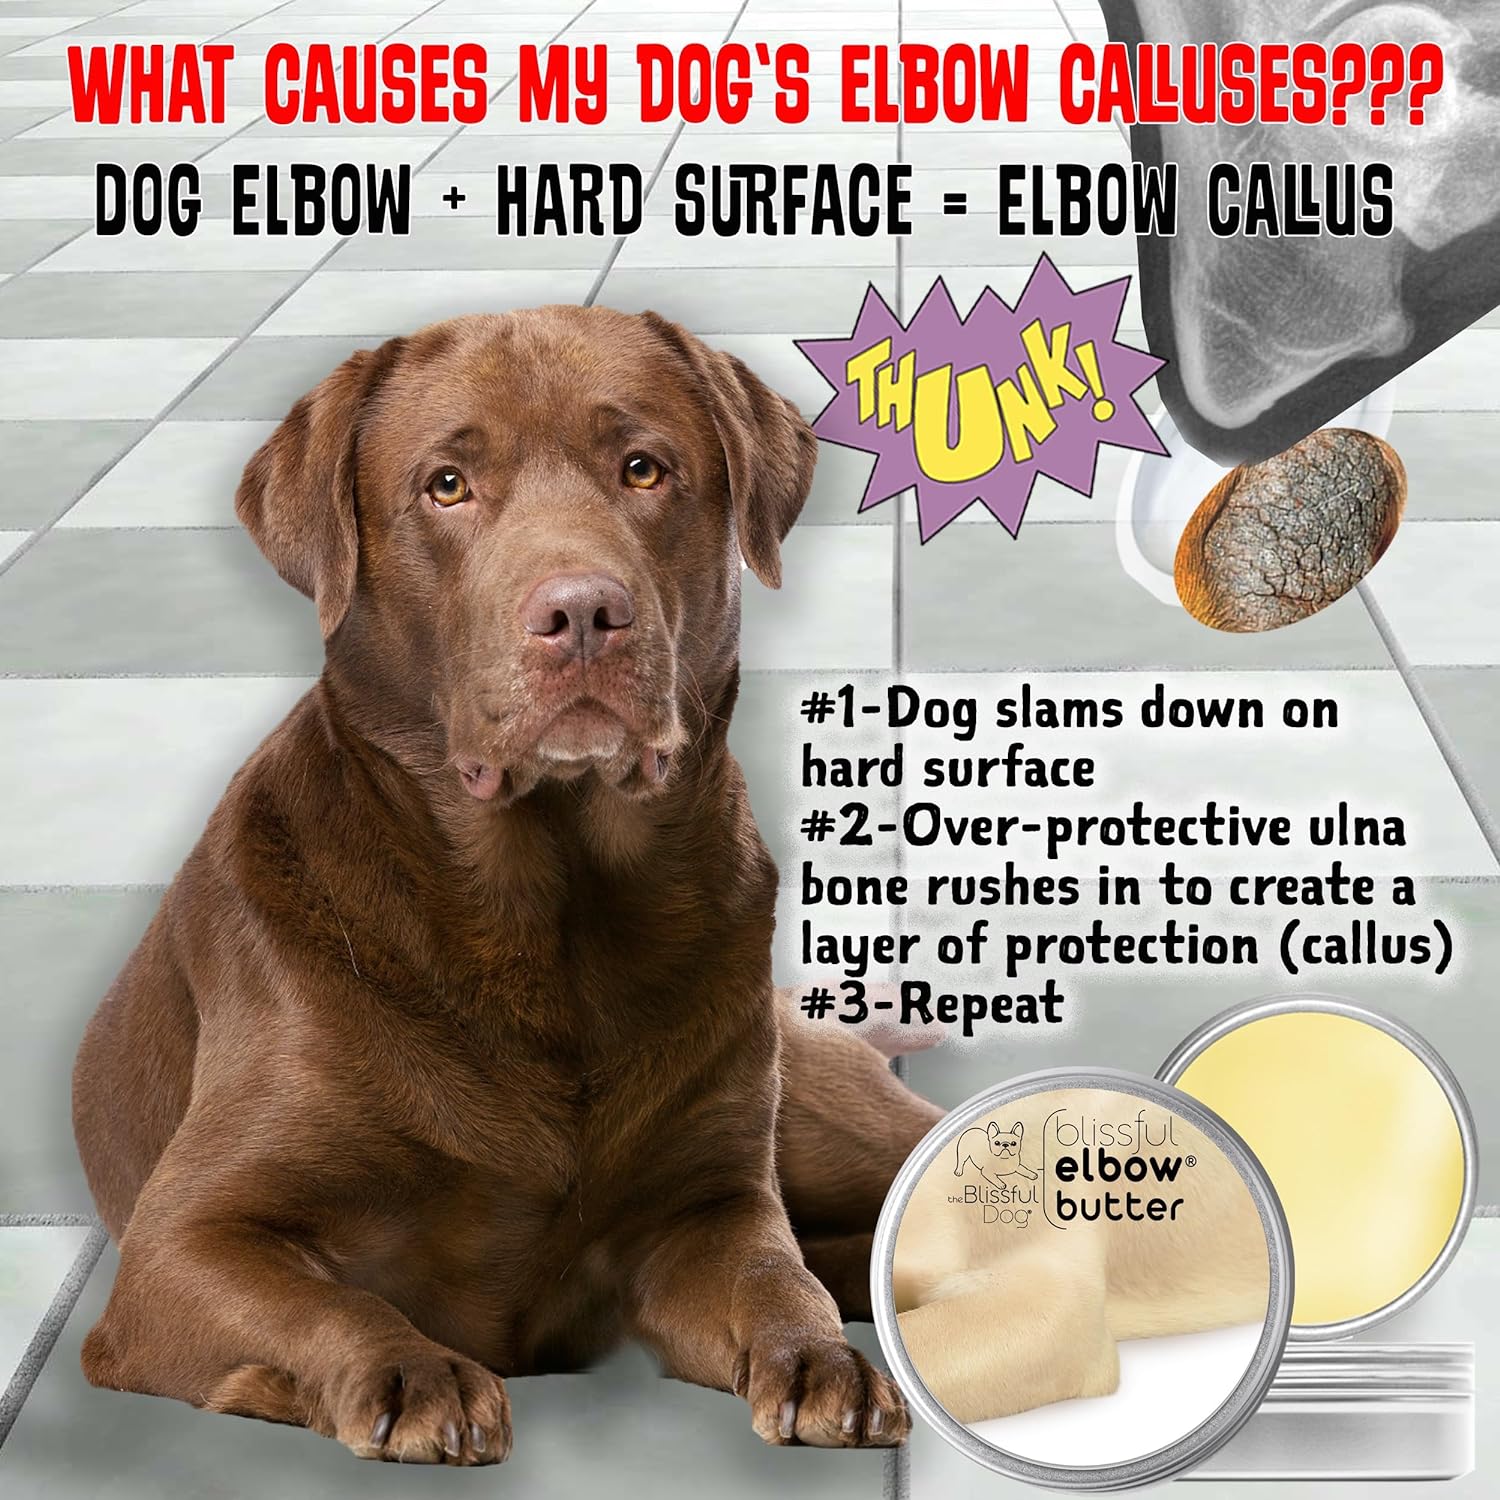 The Blissful Dog Elbow Butter, Moisturizer for Dry, Cracked Elbow Calluses, Versatile Dog Balm, Lick-Safe Elbow Balm for Dogs, 2 oz. : Pet Supplies